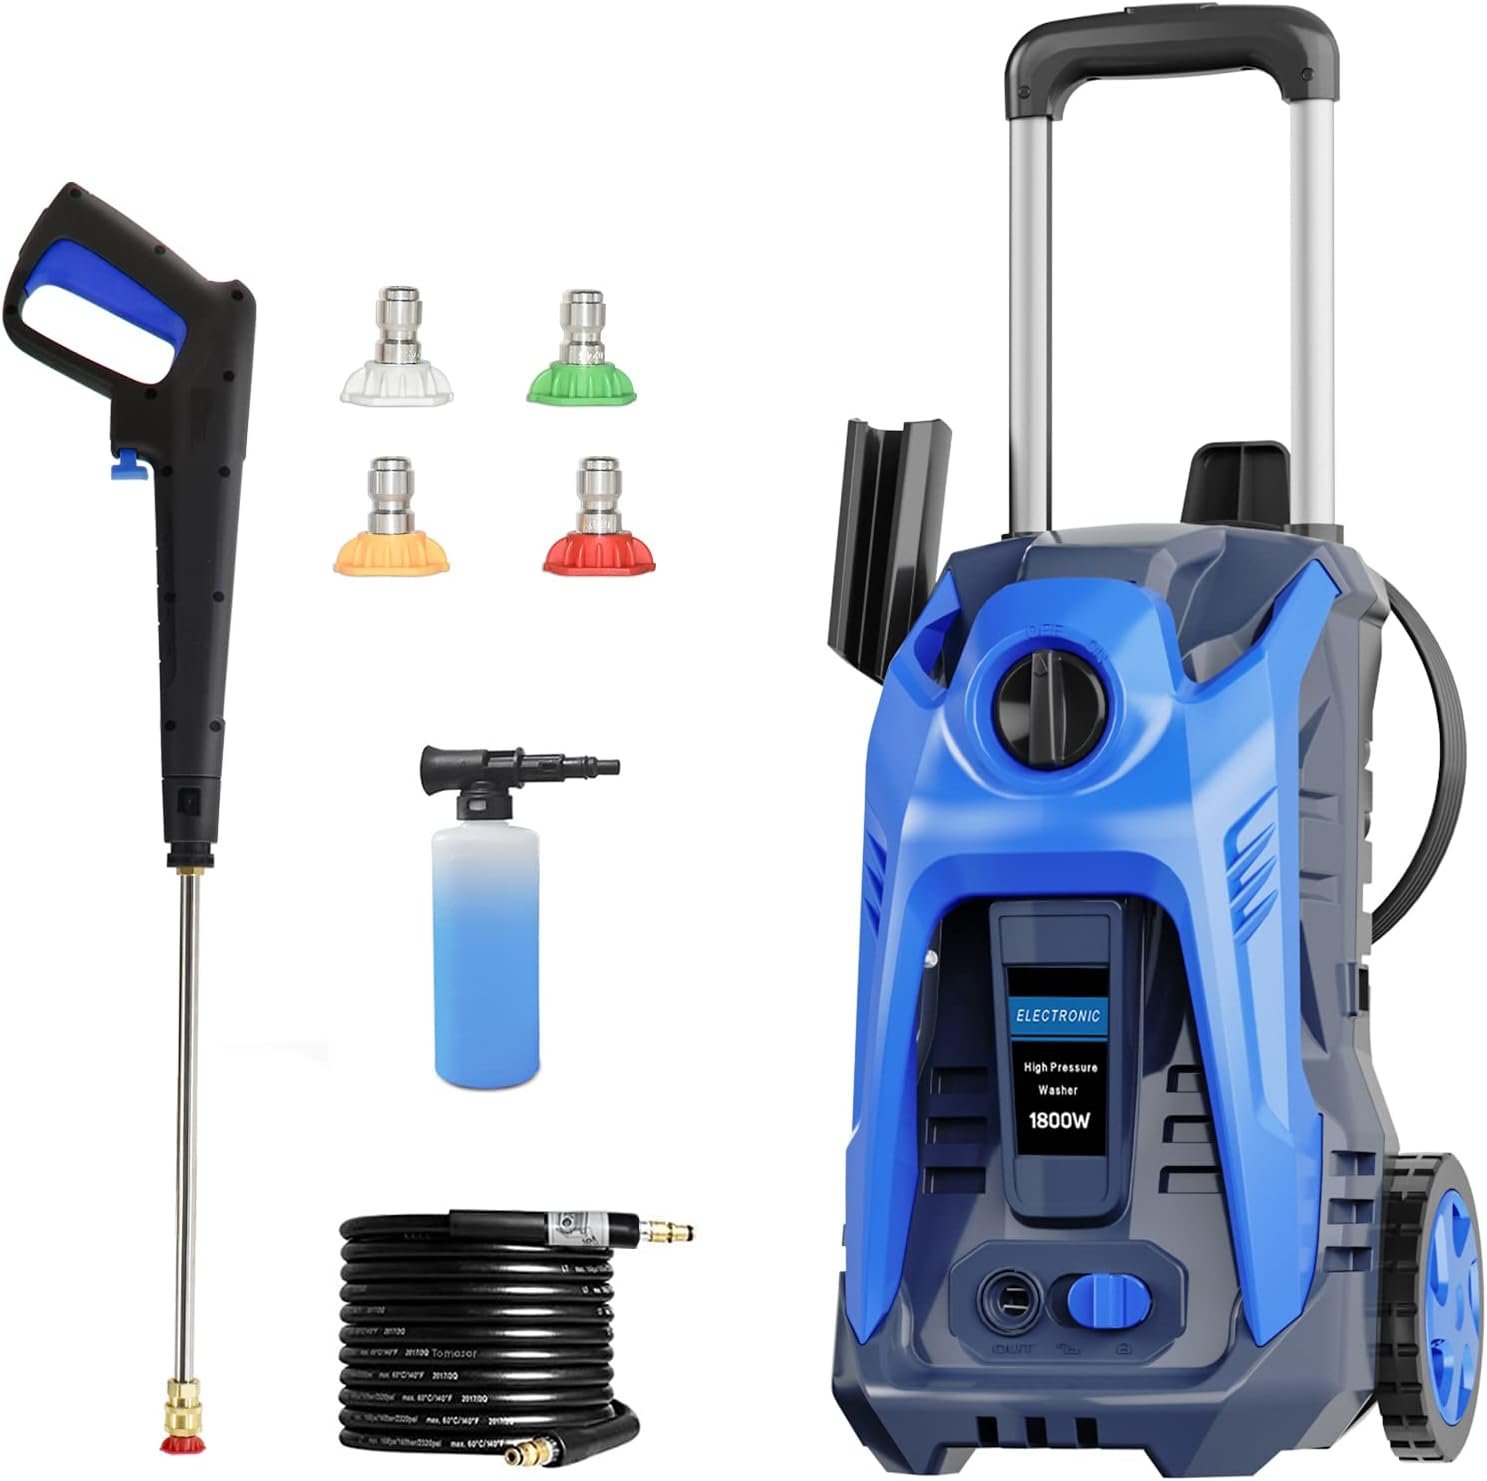 Pressure Washer 4200 PSI 2.6 GPM Electric Power Washer review